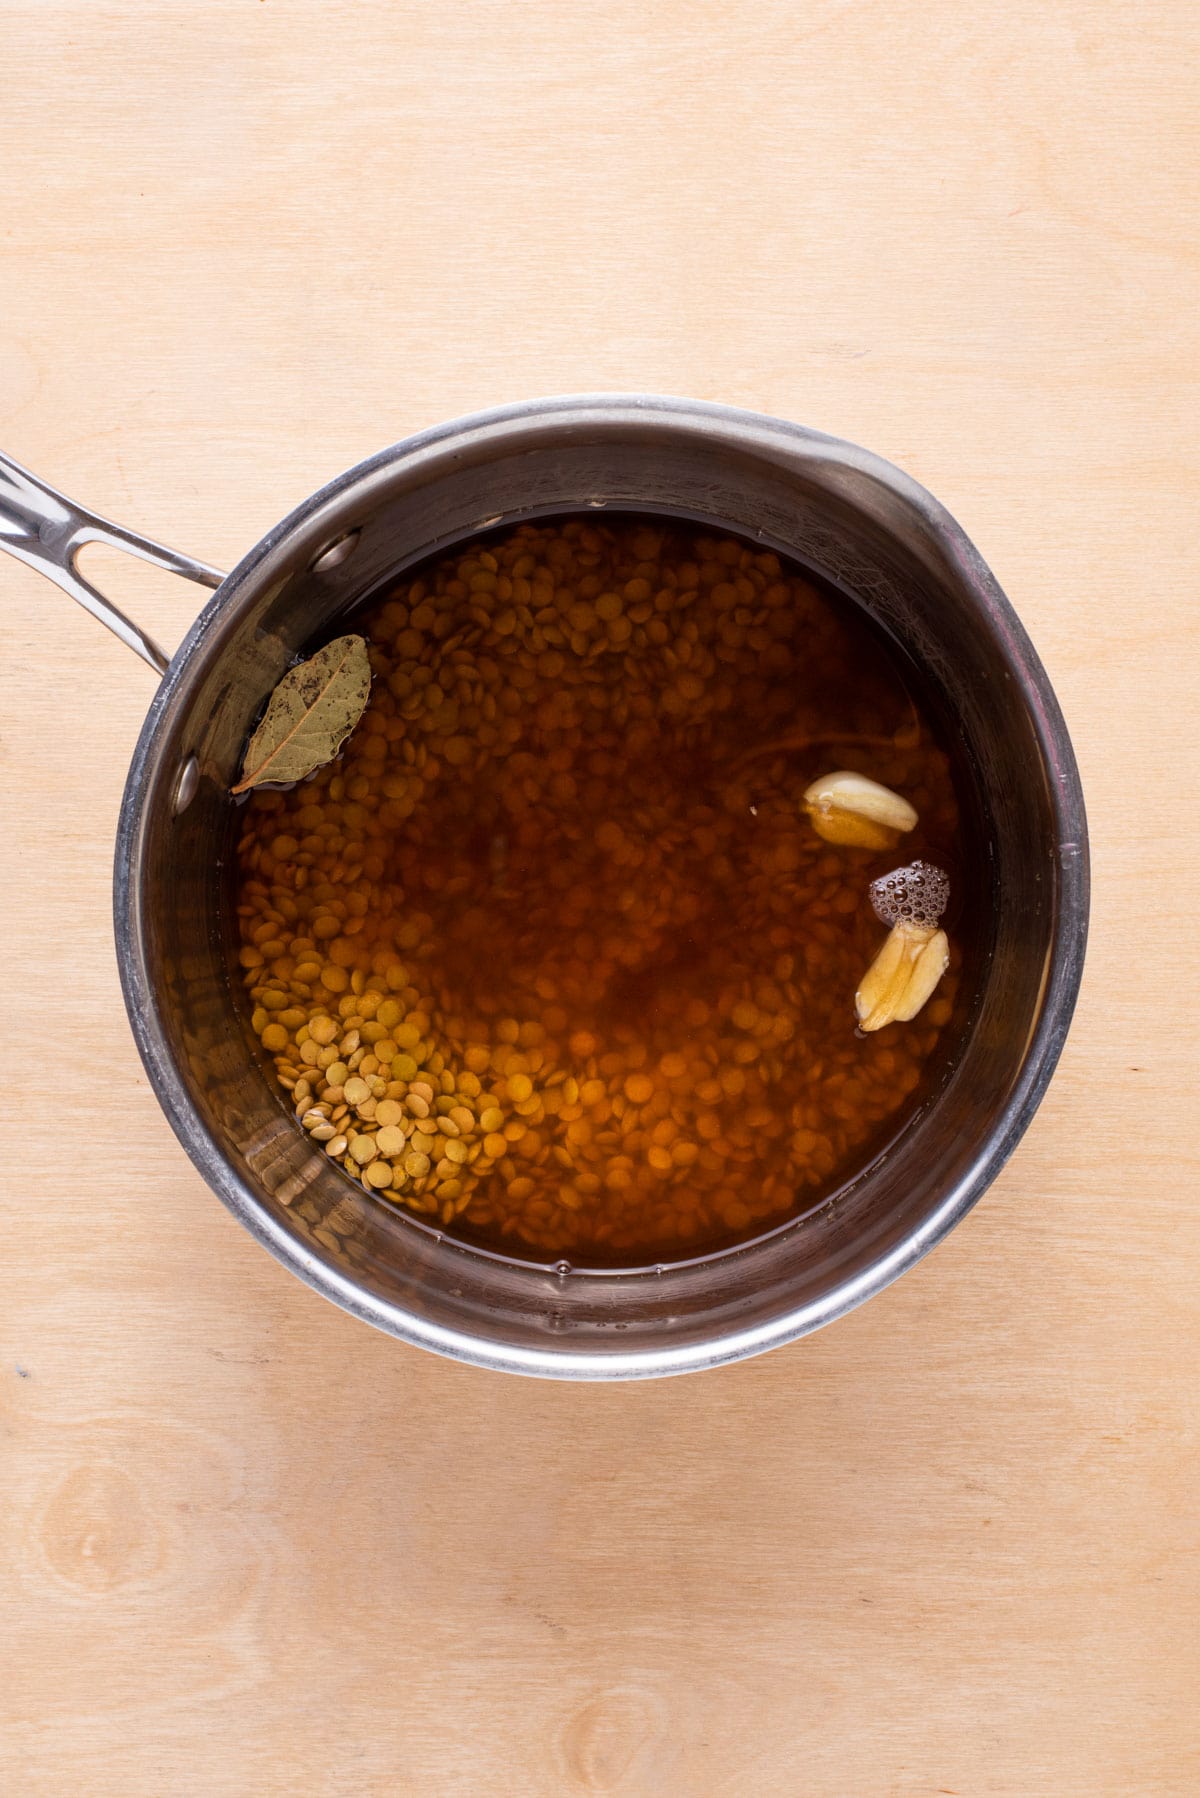 Lentils cooking in a pot with vegetable broth.